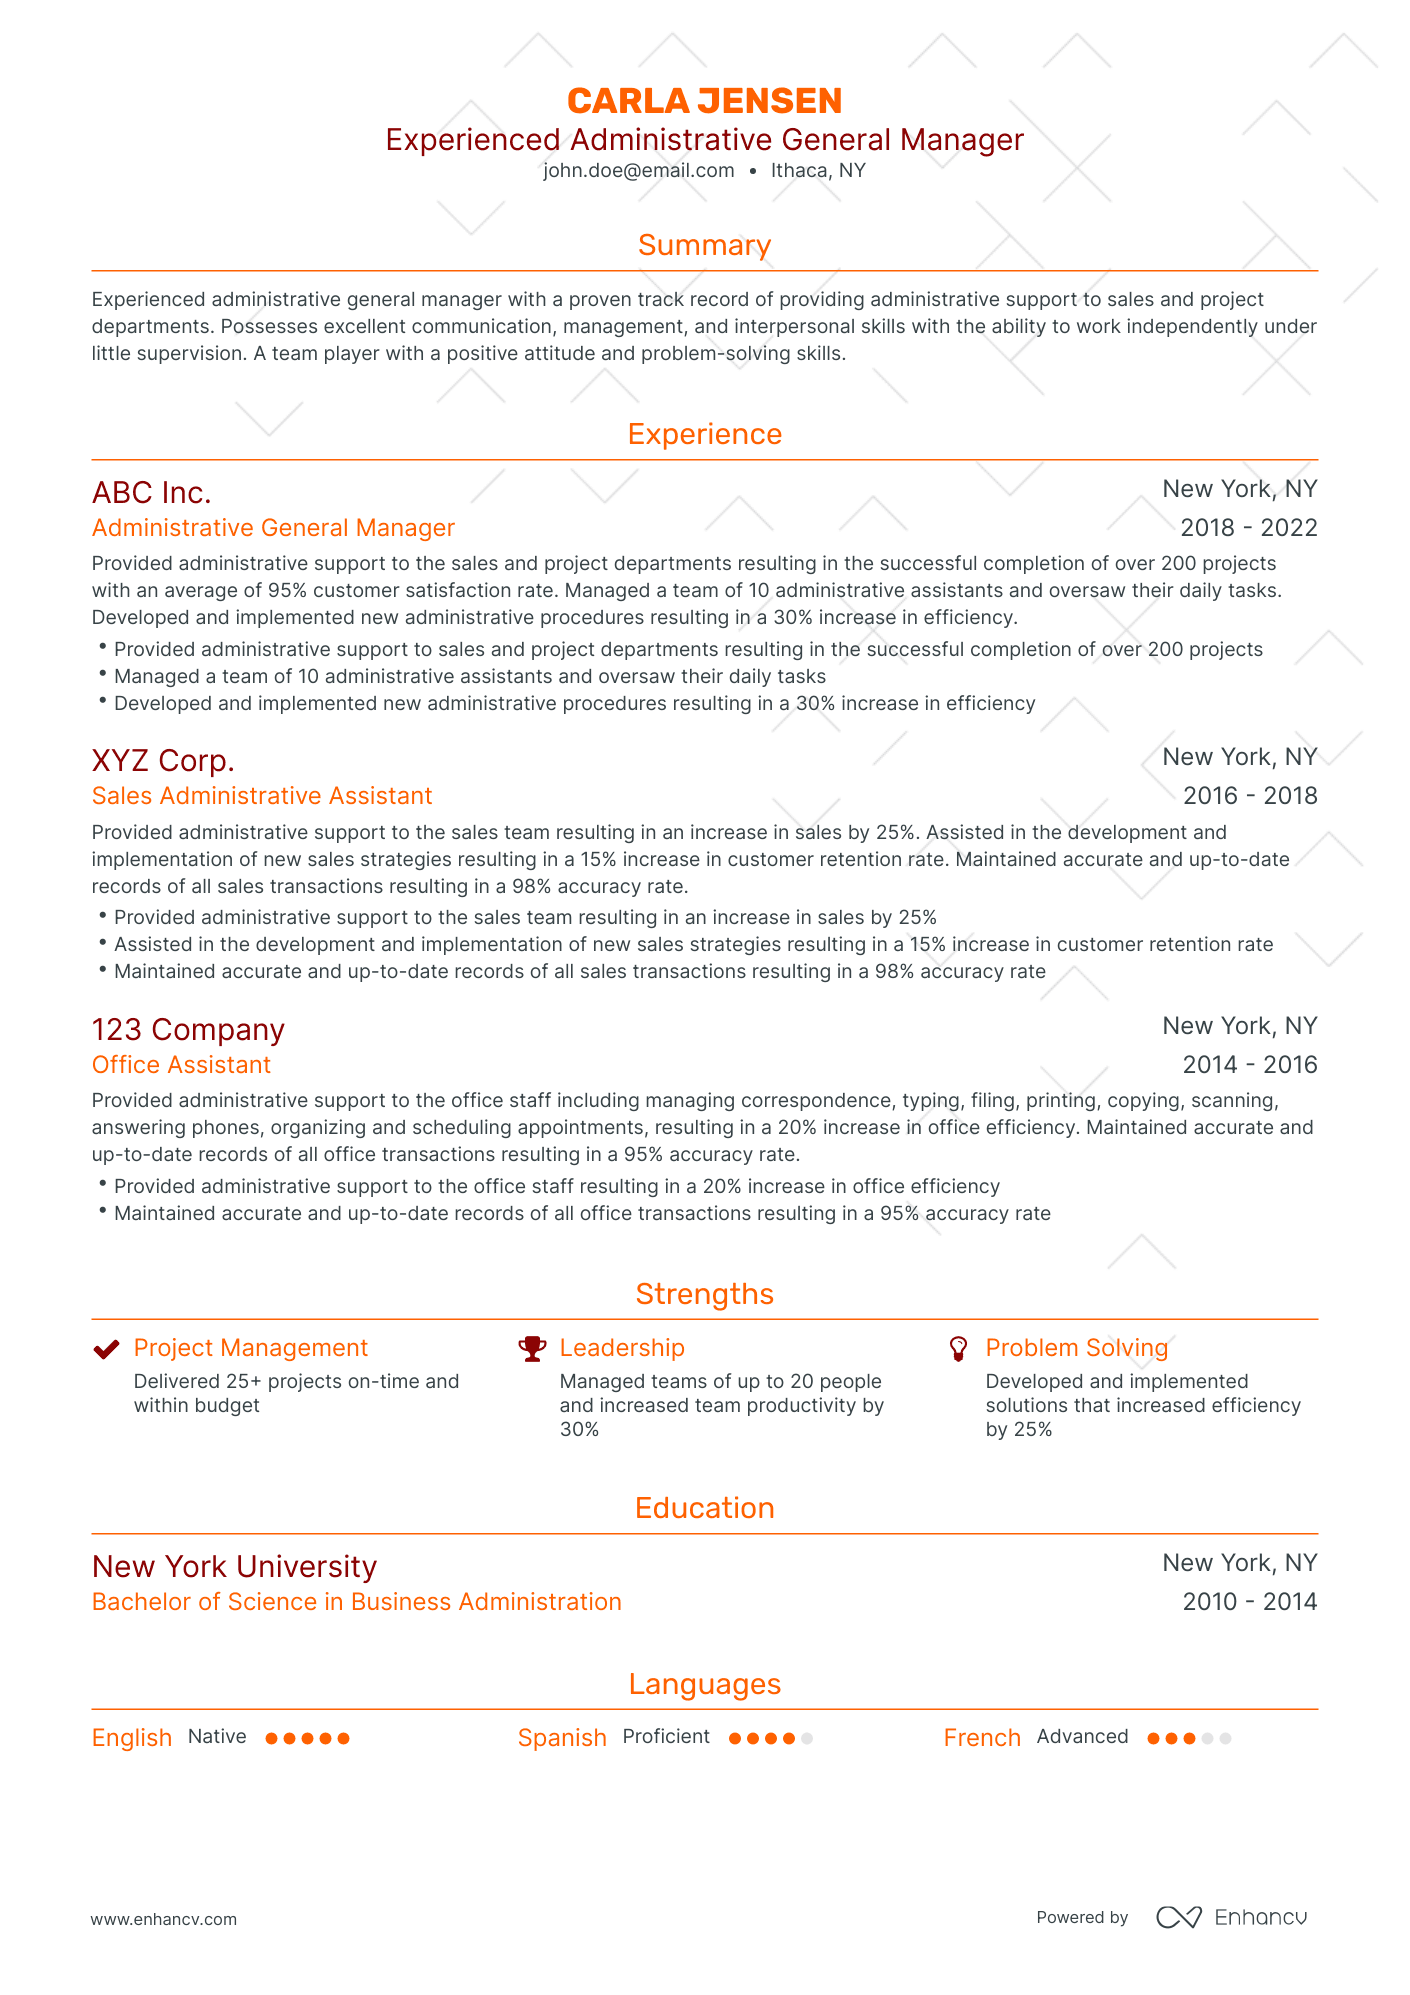 Traditional Administrative General Manager Resume Template